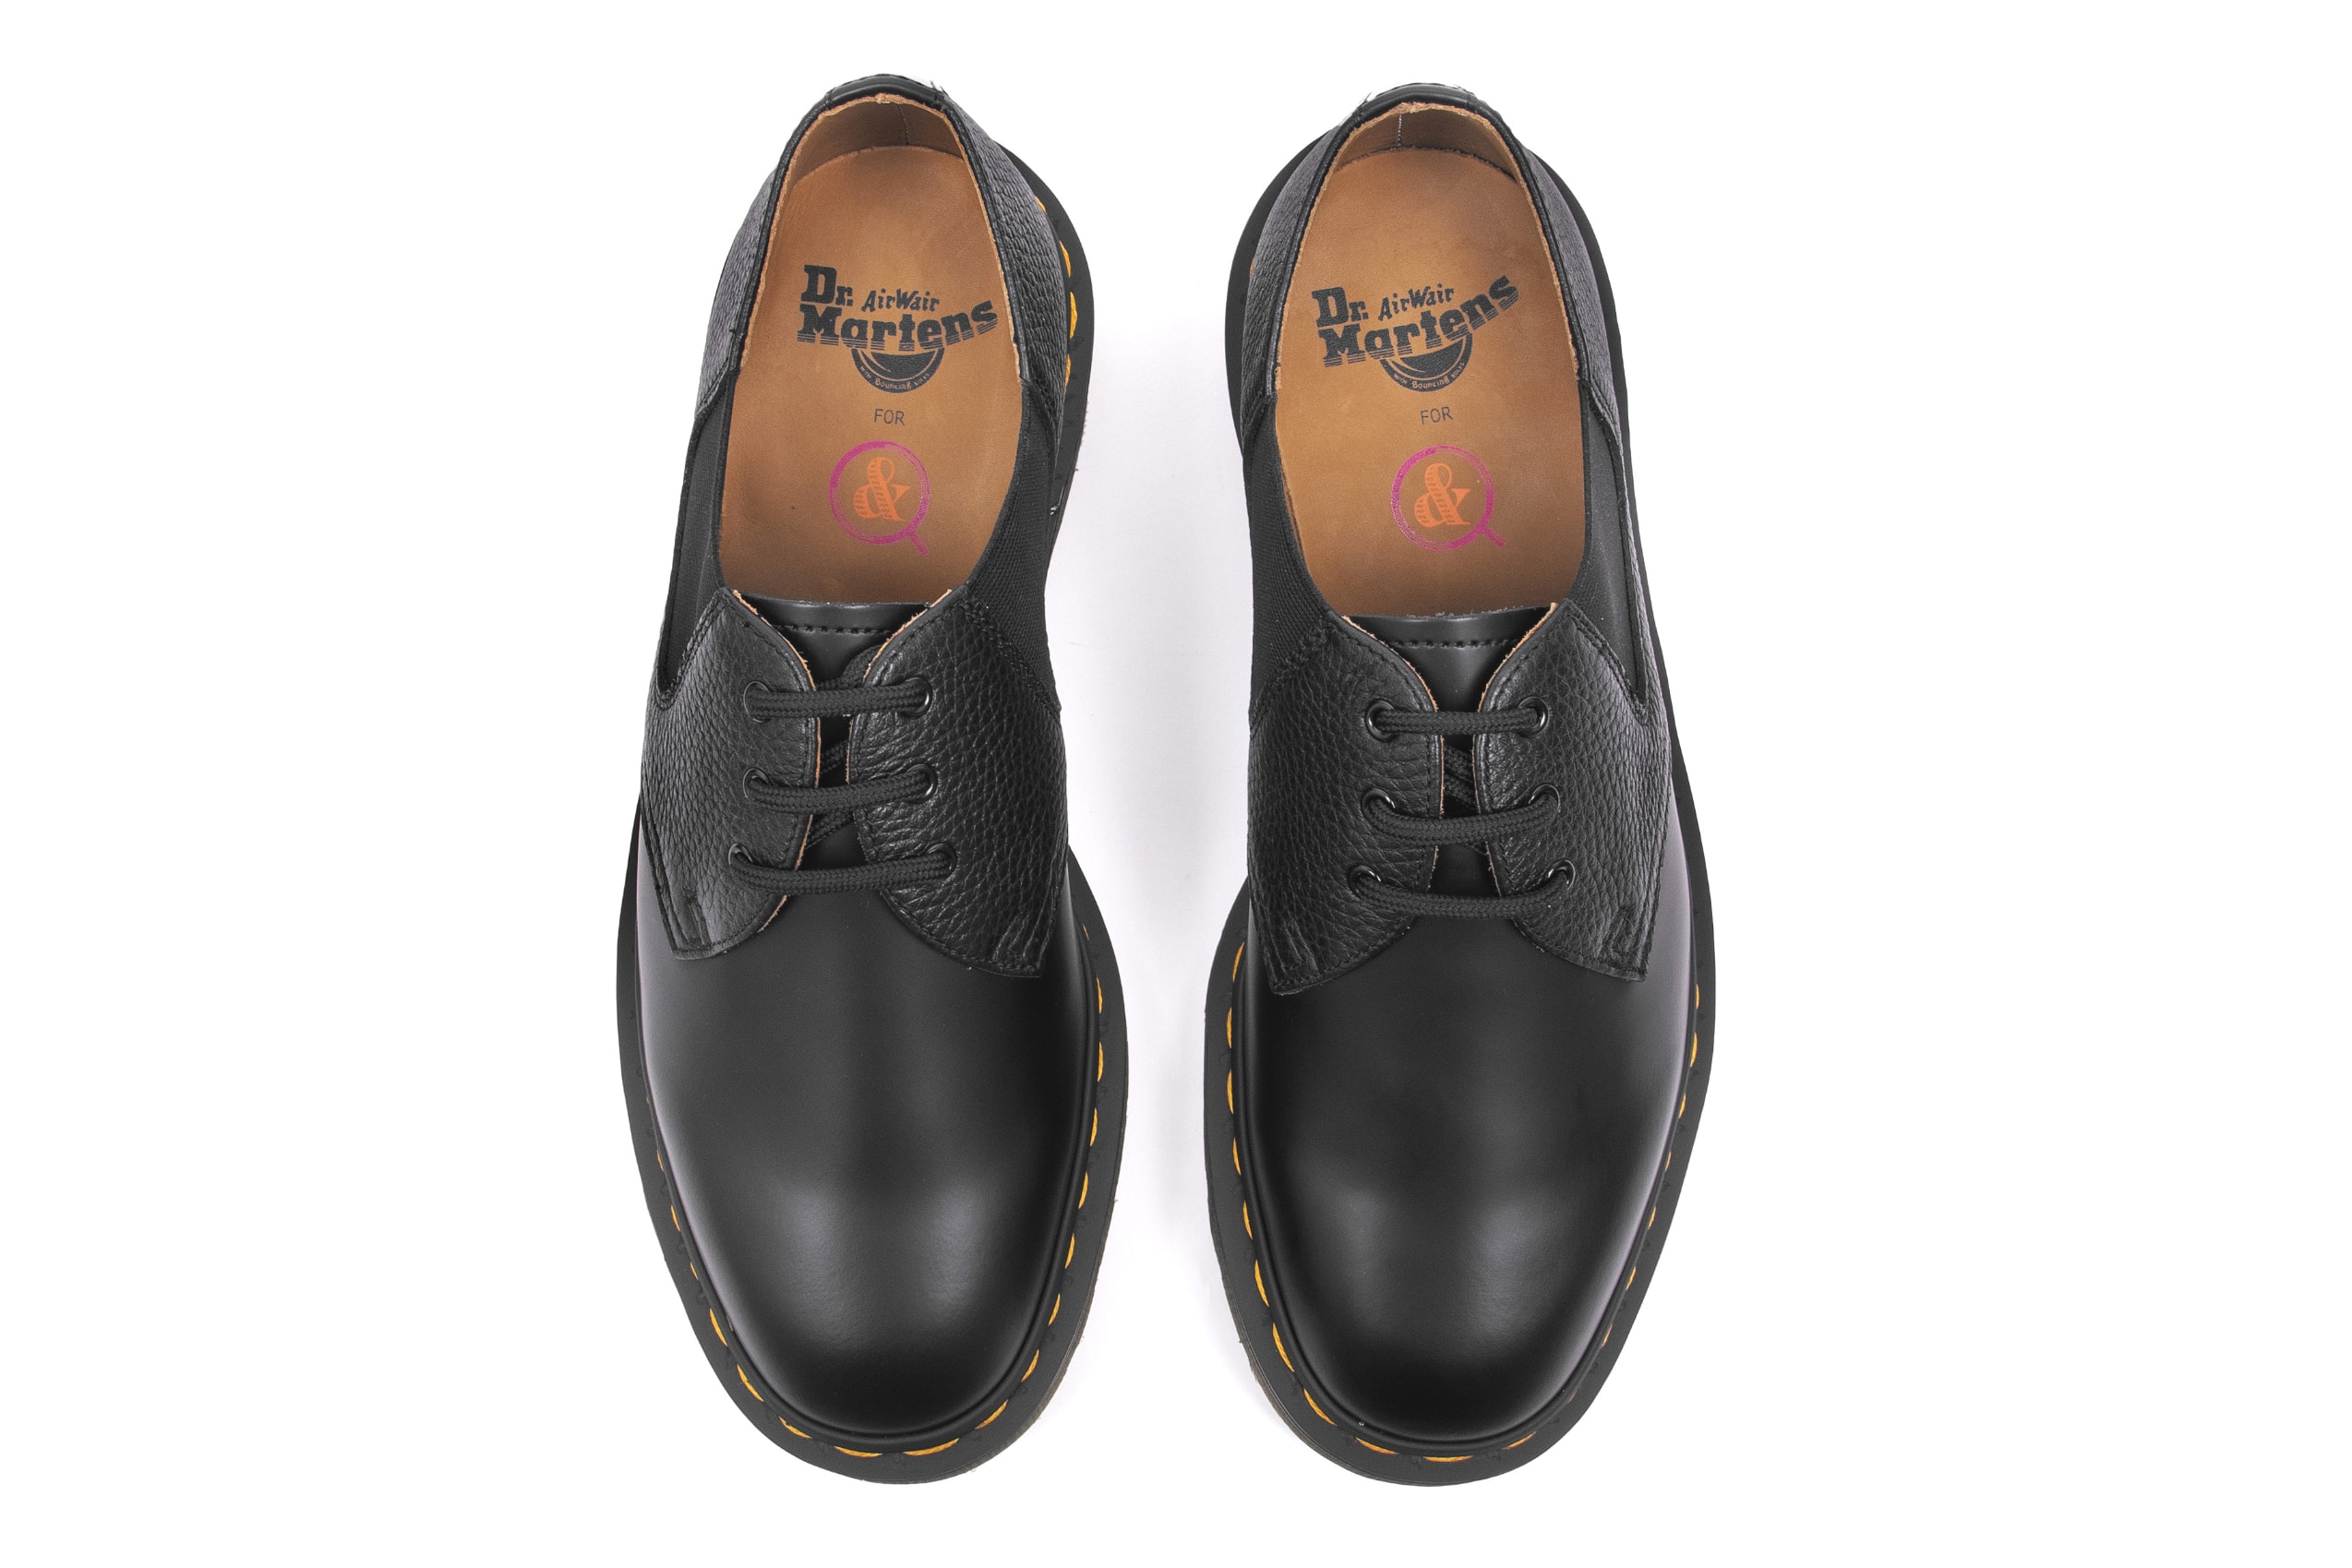 United Arrows sons Dr. Martens 1461 Shoe leather collaboration collection release date price drop release date buy purchase sale sell low